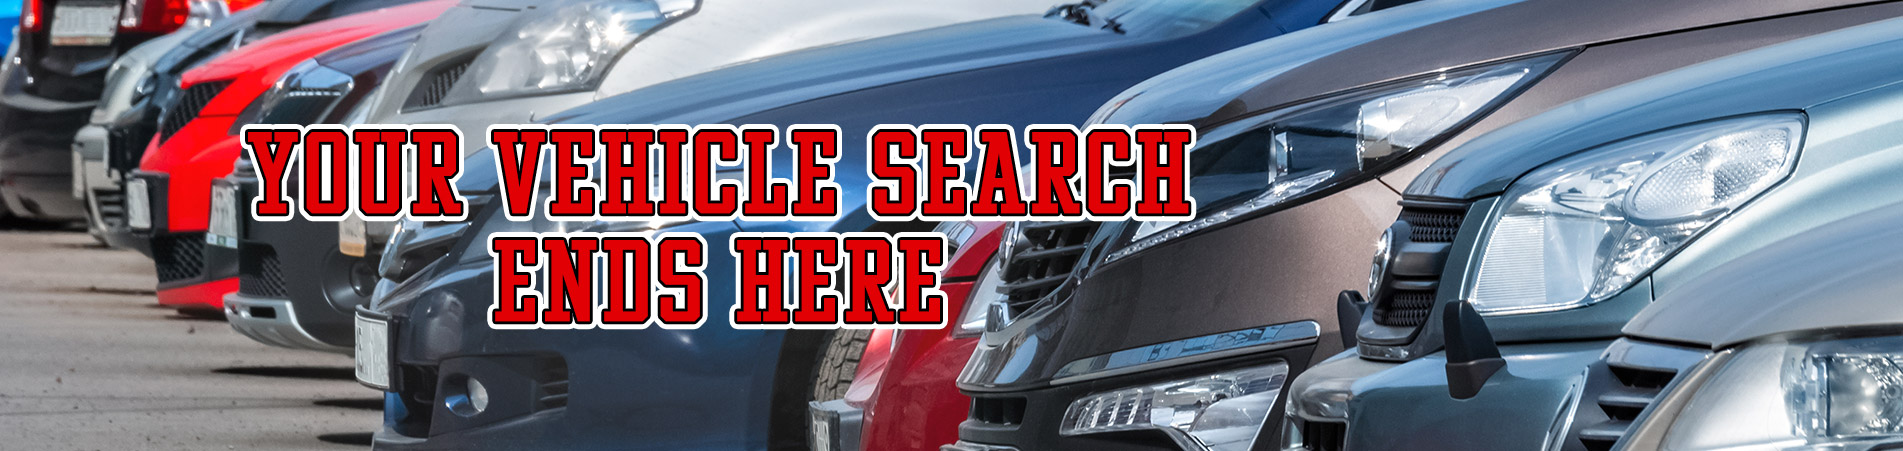 Your vehicle search ends here